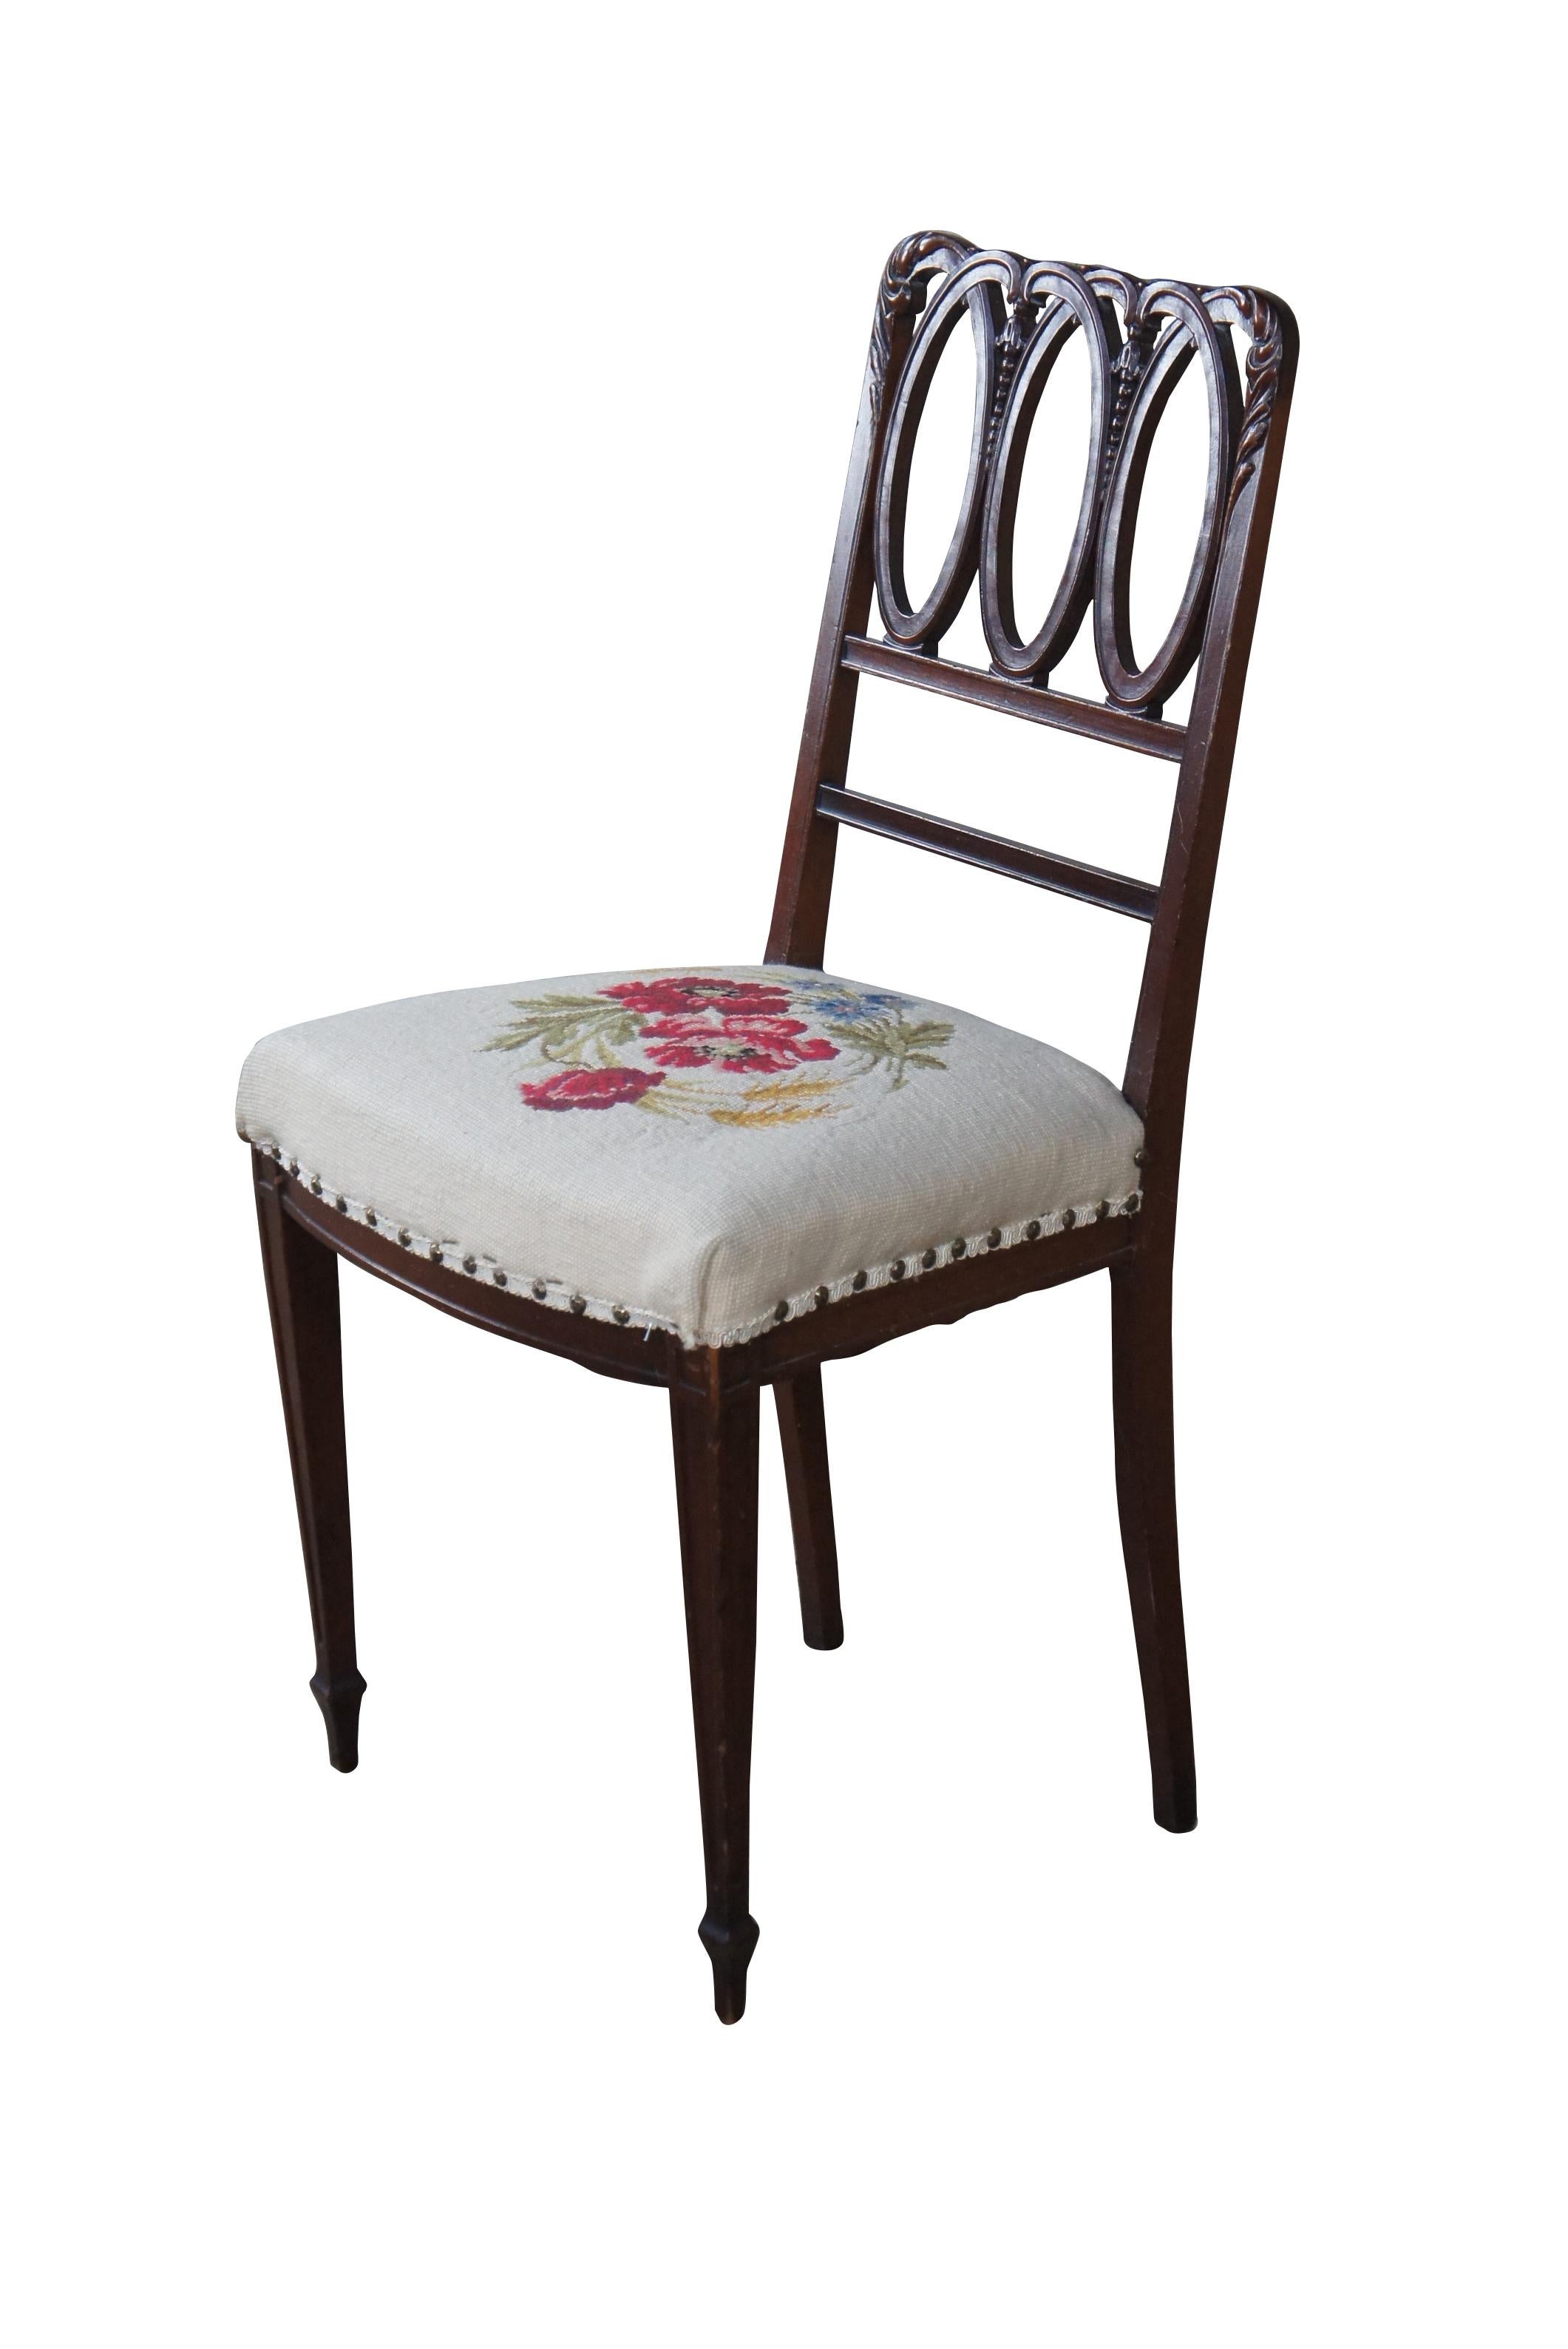 Antique Hepplewhite Mahogany Needlepoint Hoop Back Side Dining Accent Chair  In Good Condition For Sale In Dayton, OH